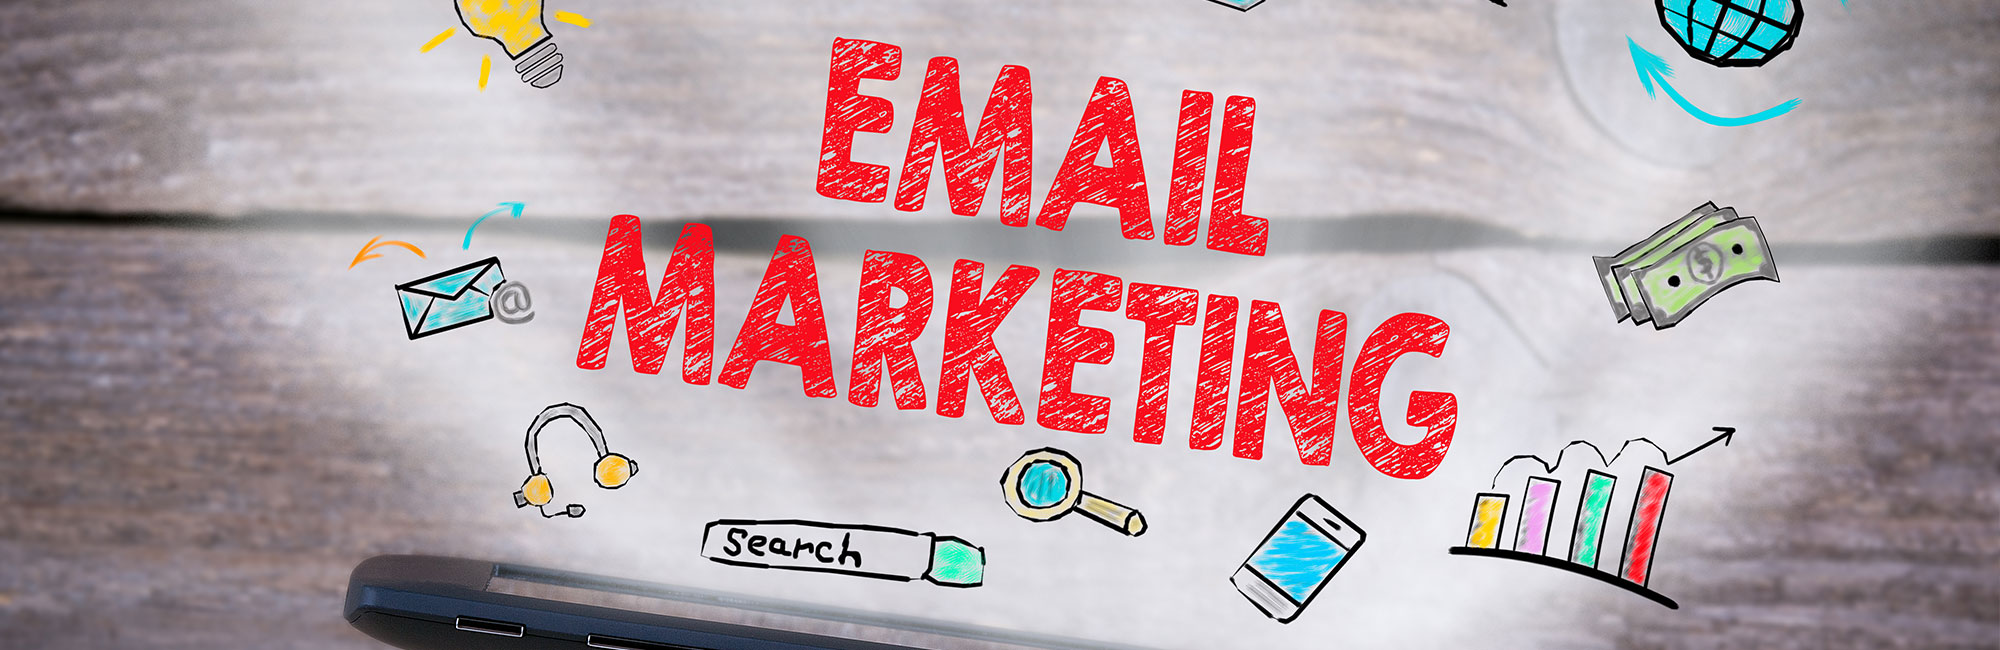 How to increase conversions for email marketing campaigns?